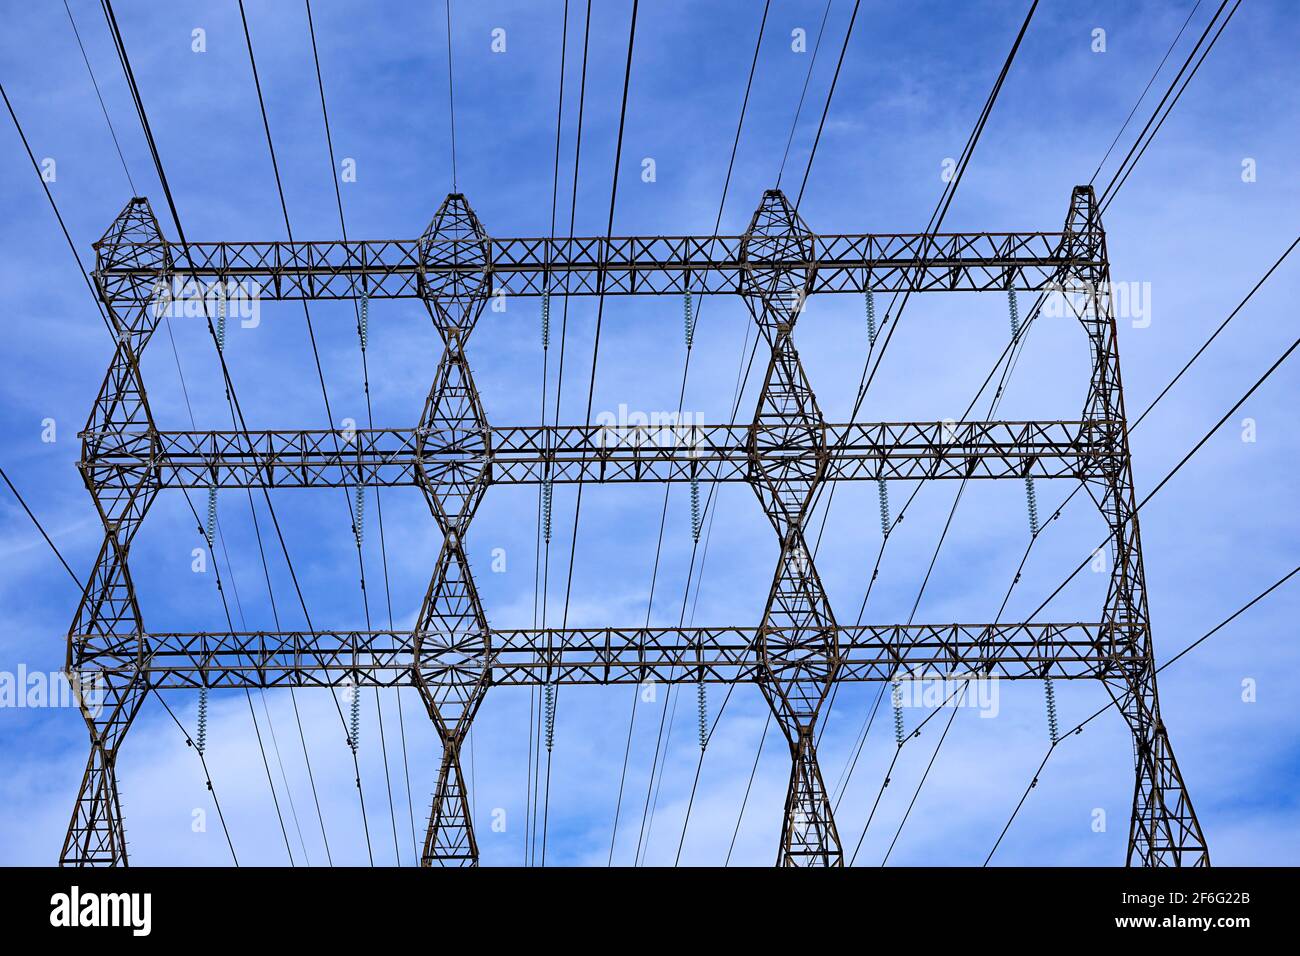 Electricity transmission lines and supporting towers Stock Photo